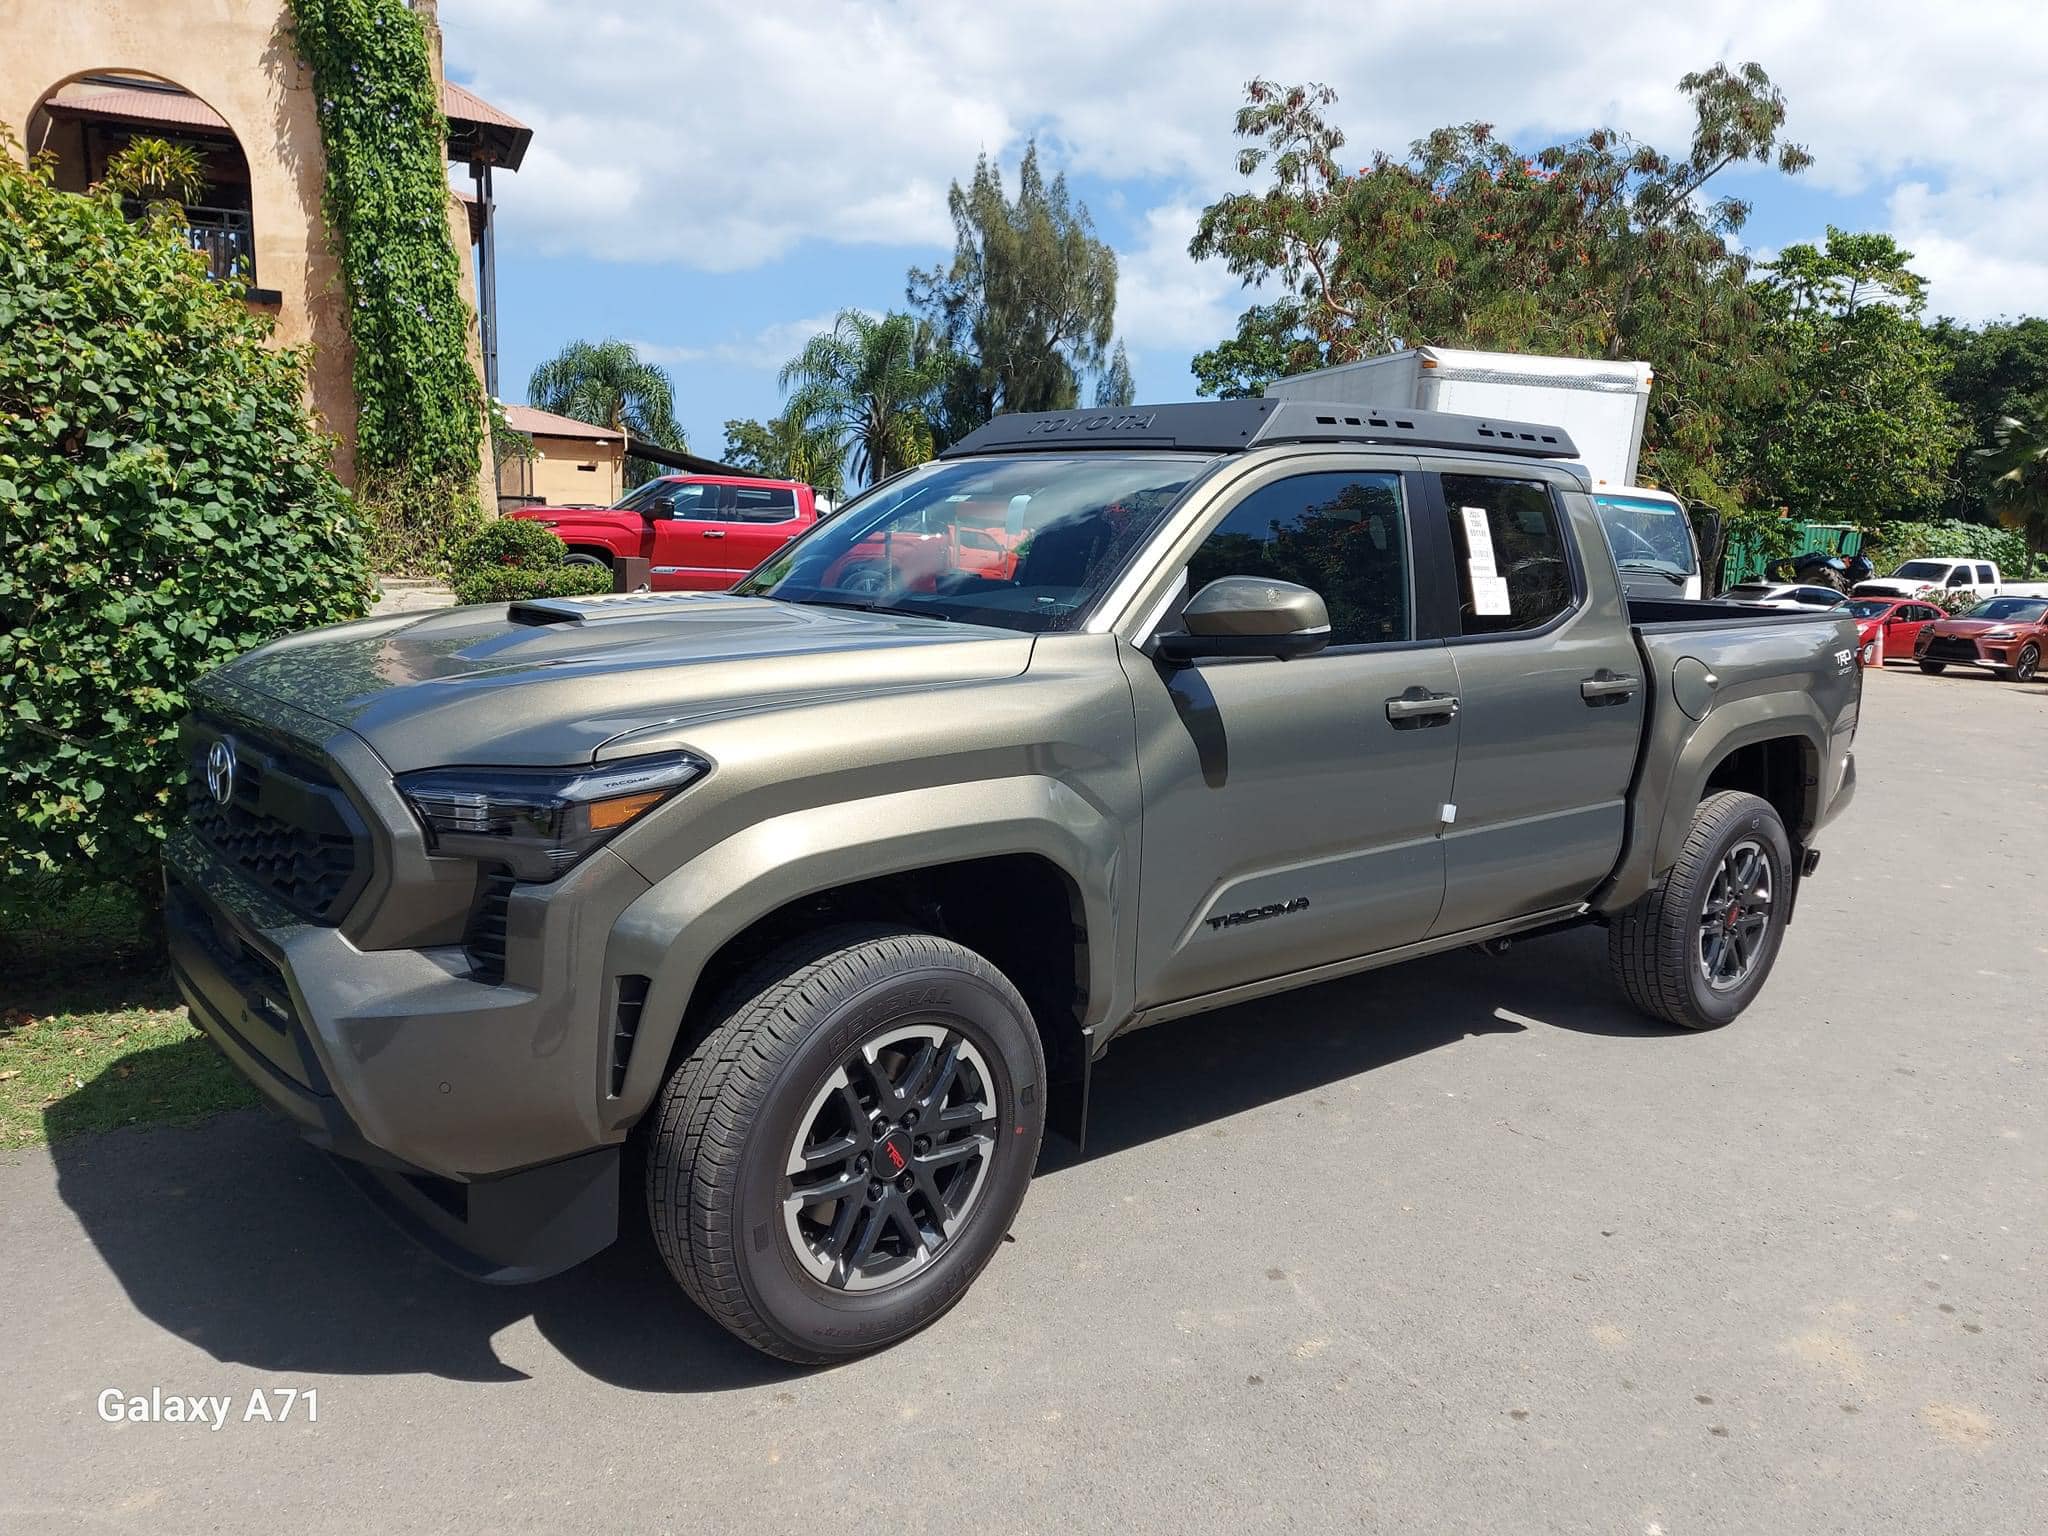 2024 Tacoma Official BRONZE OXIDE 2024 Tacoma Thread (4th Gen) bronze-oxide-trd-sport-2024-tacoma-with-roof-rack-1